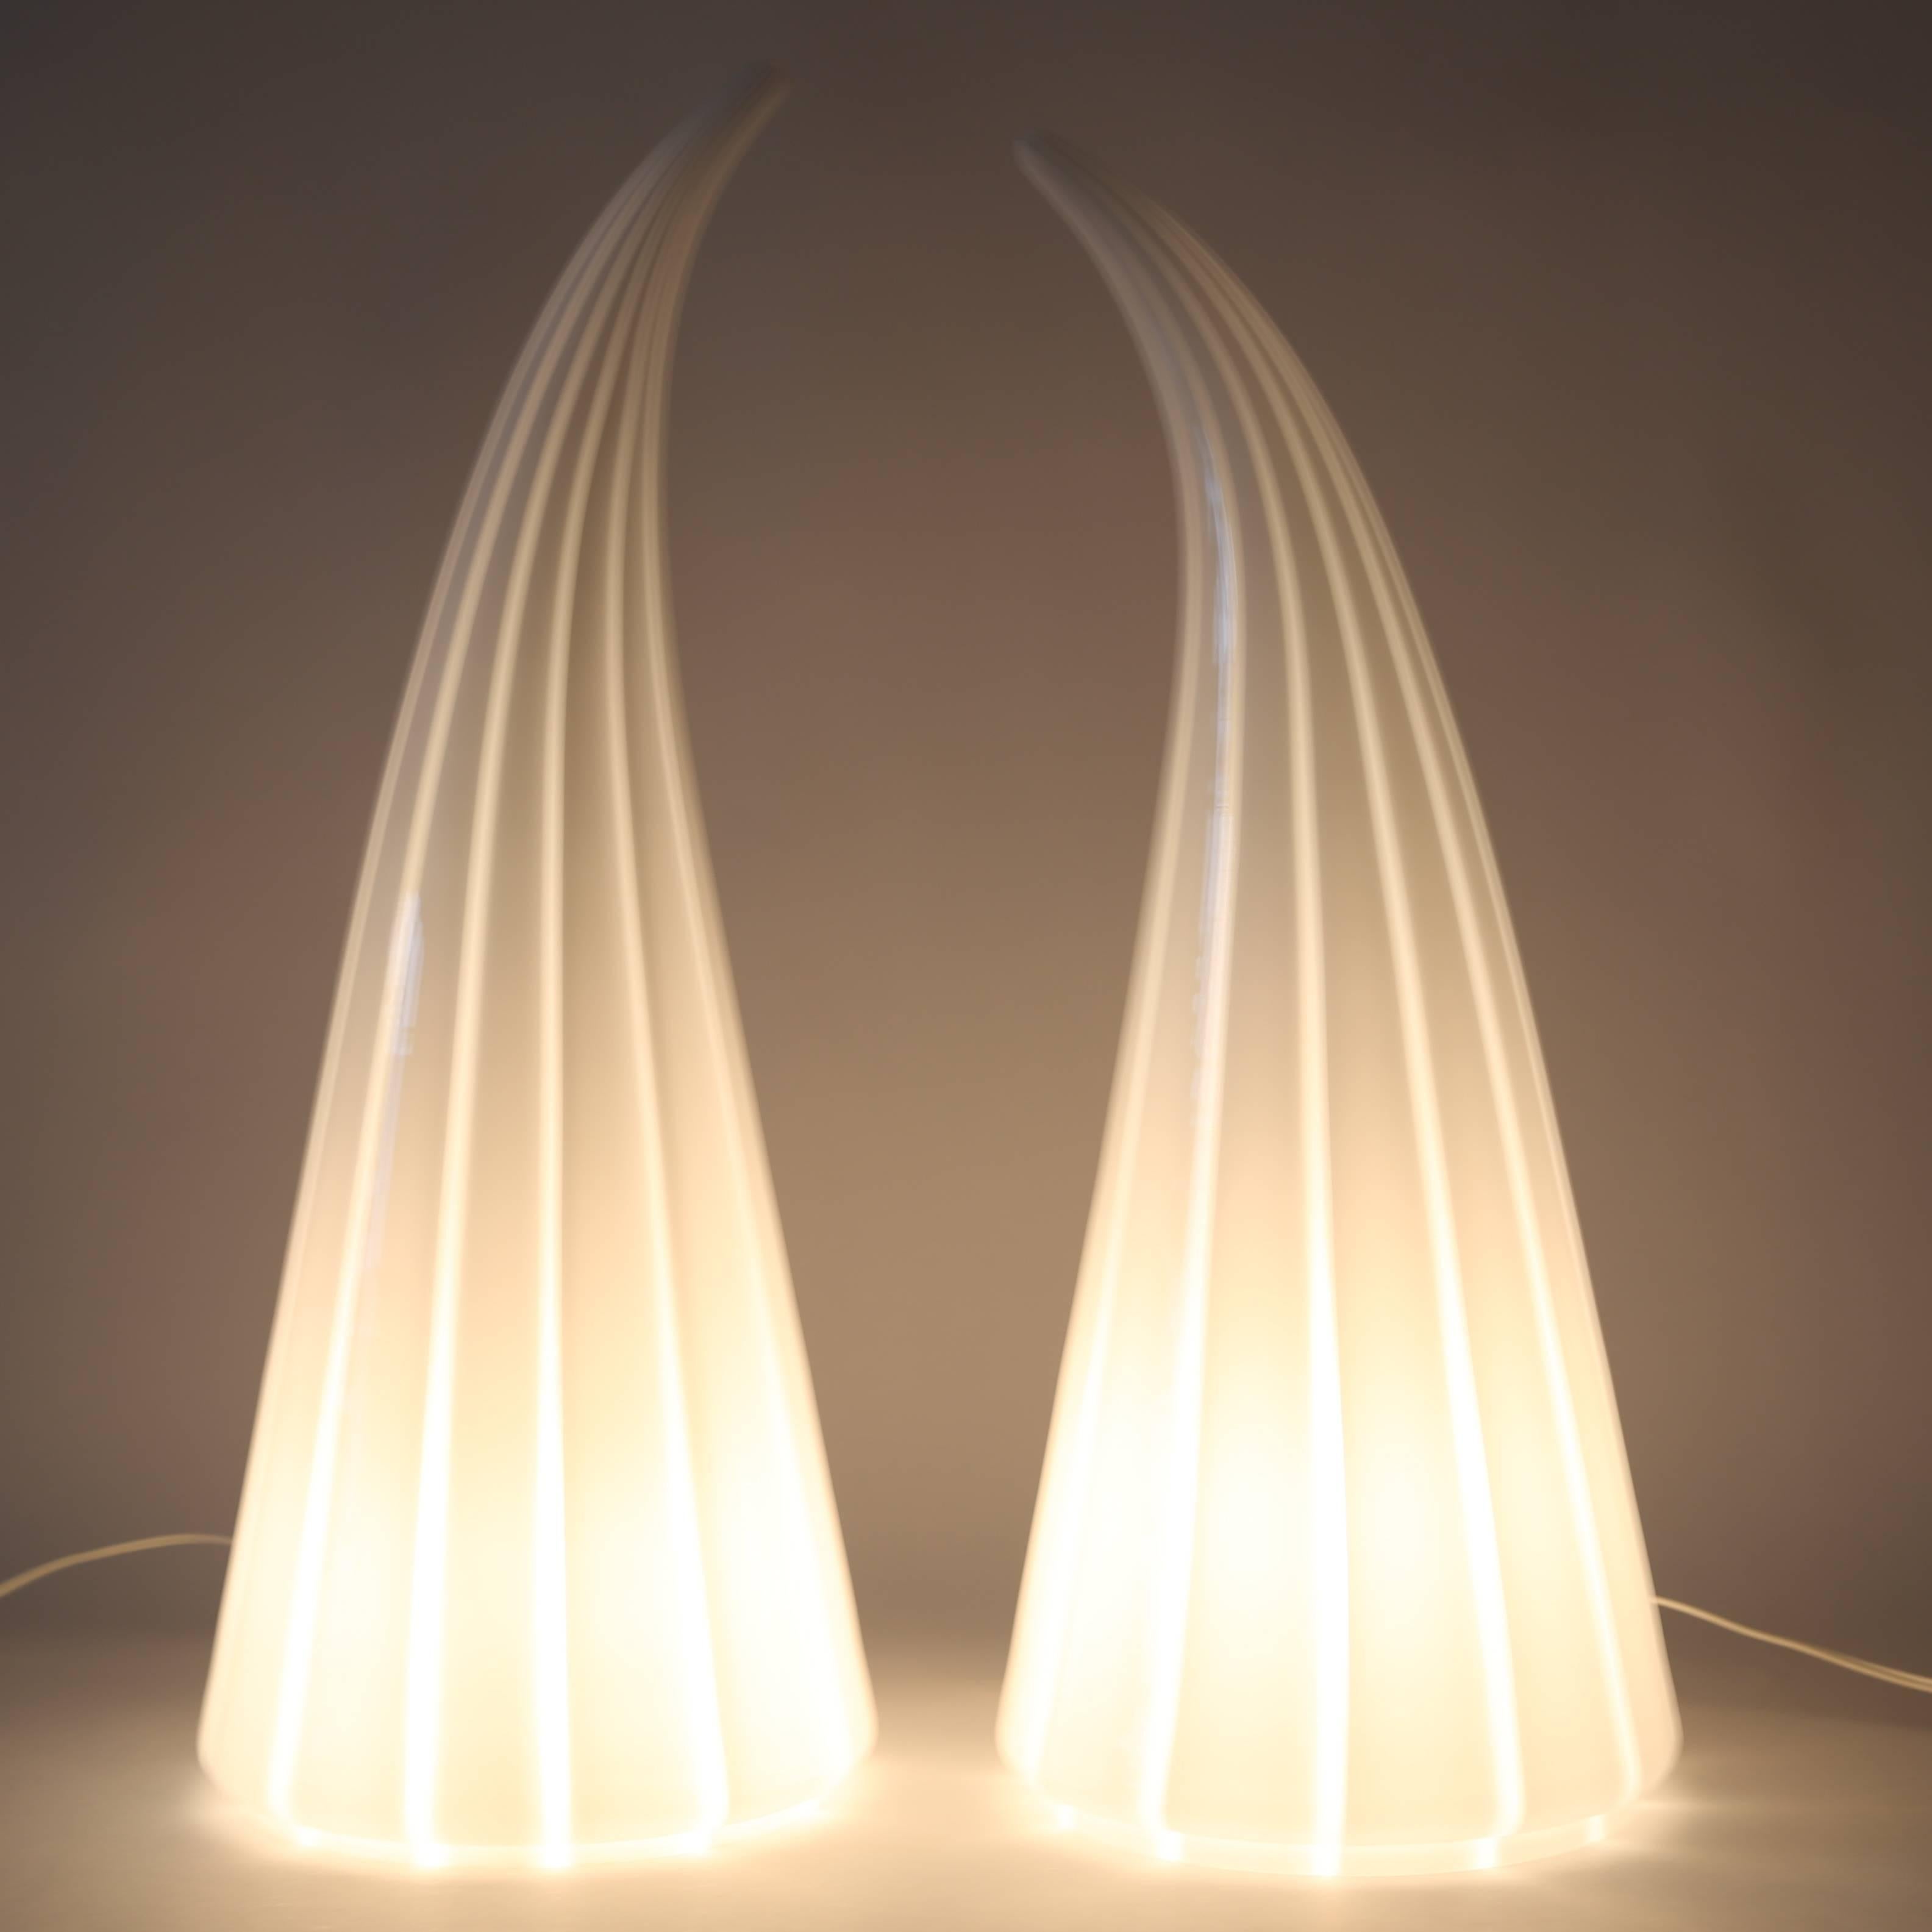 Late 20th Century Pair of Vetri Murano Conical Table Lamps, Circa 1980s For Sale